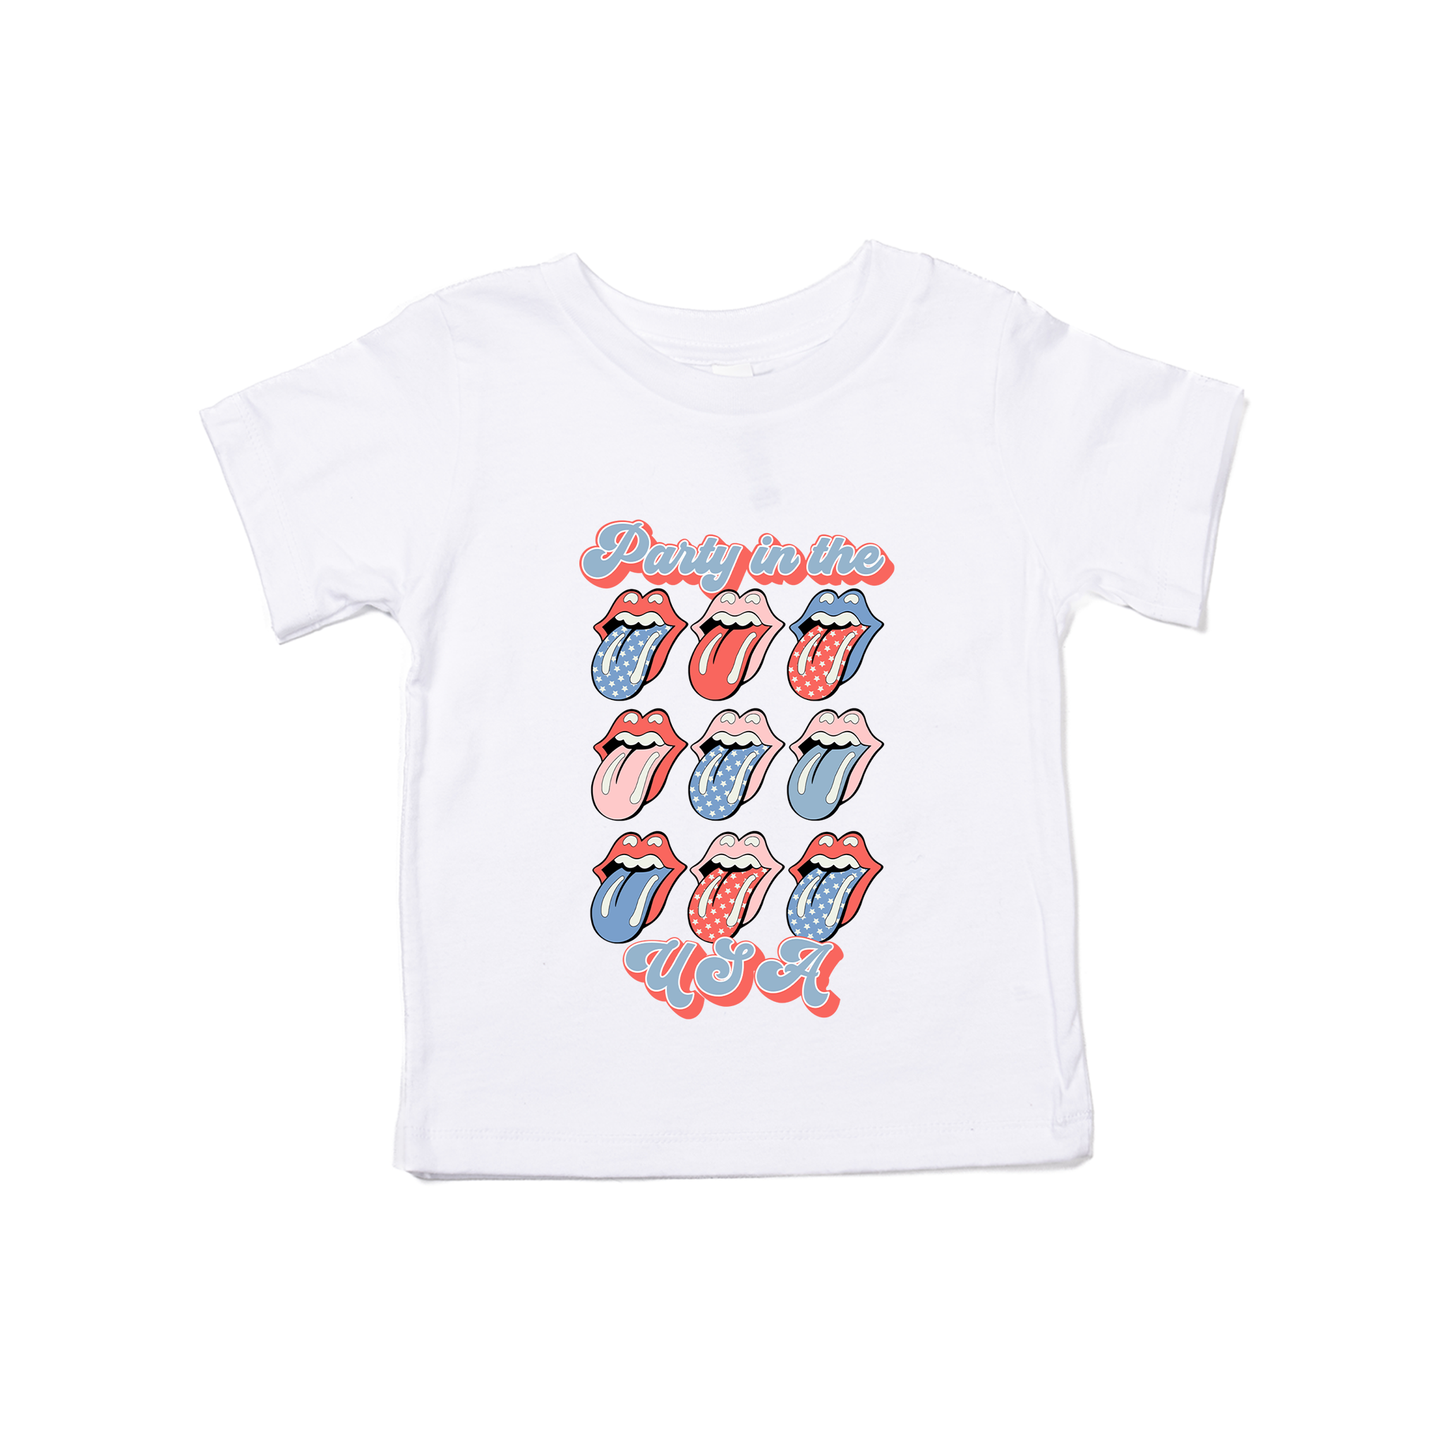 Party in the USA (Graphic) - Kids Tee (White)